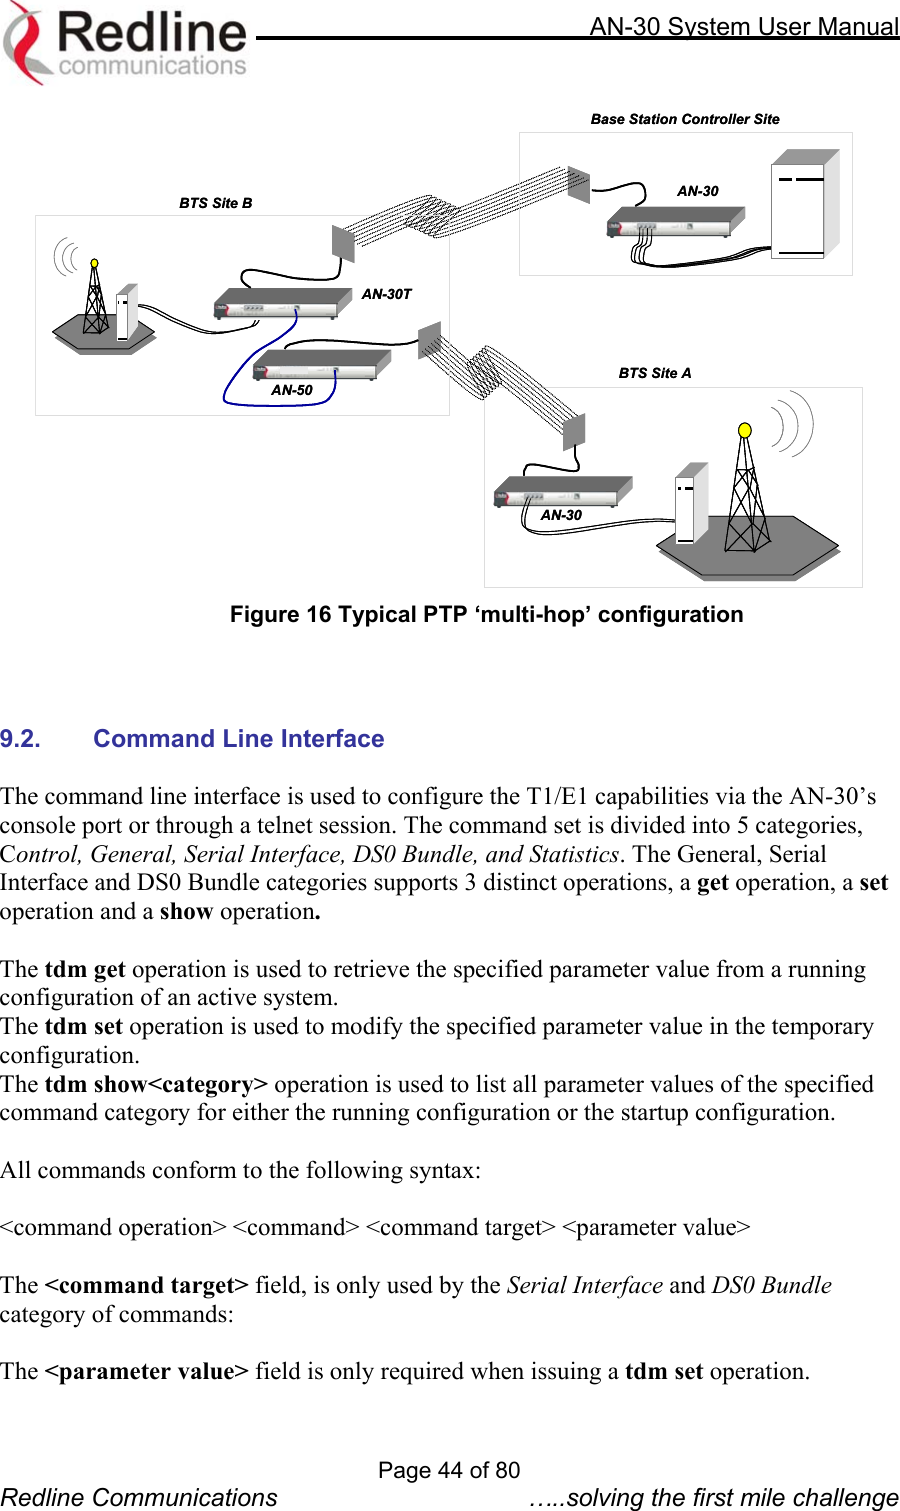     AN-30 System User Manual   AN-30TAN-30TBTS Site AAN-30TAN-30TBTS Site ABTS Site BAN-30TAN-50Base Station Controller SiteBTS Site BBase Station Controller SiteAN-30TAN-50Figure 16 Typical PTP ‘multi-hop’ configuration    9.2.  Command Line Interface  The command line interface is used to configure the T1/E1 capabilities via the AN-30’s console port or through a telnet session. The command set is divided into 5 categories, Control, General, Serial Interface, DS0 Bundle, and Statistics. The General, Serial Interface and DS0 Bundle categories supports 3 distinct operations, a get operation, a set operation and a show operation.    The tdm get operation is used to retrieve the specified parameter value from a running configuration of an active system.  The tdm set operation is used to modify the specified parameter value in the temporary configuration.  The tdm show&lt;category&gt; operation is used to list all parameter values of the specified command category for either the running configuration or the startup configuration.    All commands conform to the following syntax:  &lt;command operation&gt; &lt;command&gt; &lt;command target&gt; &lt;parameter value&gt;  The &lt;command target&gt; field, is only used by the Serial Interface and DS0 Bundle category of commands:  The &lt;parameter value&gt; field is only required when issuing a tdm set operation.  Page 44 of 80 Redline Communications  …..solving the first mile challenge 